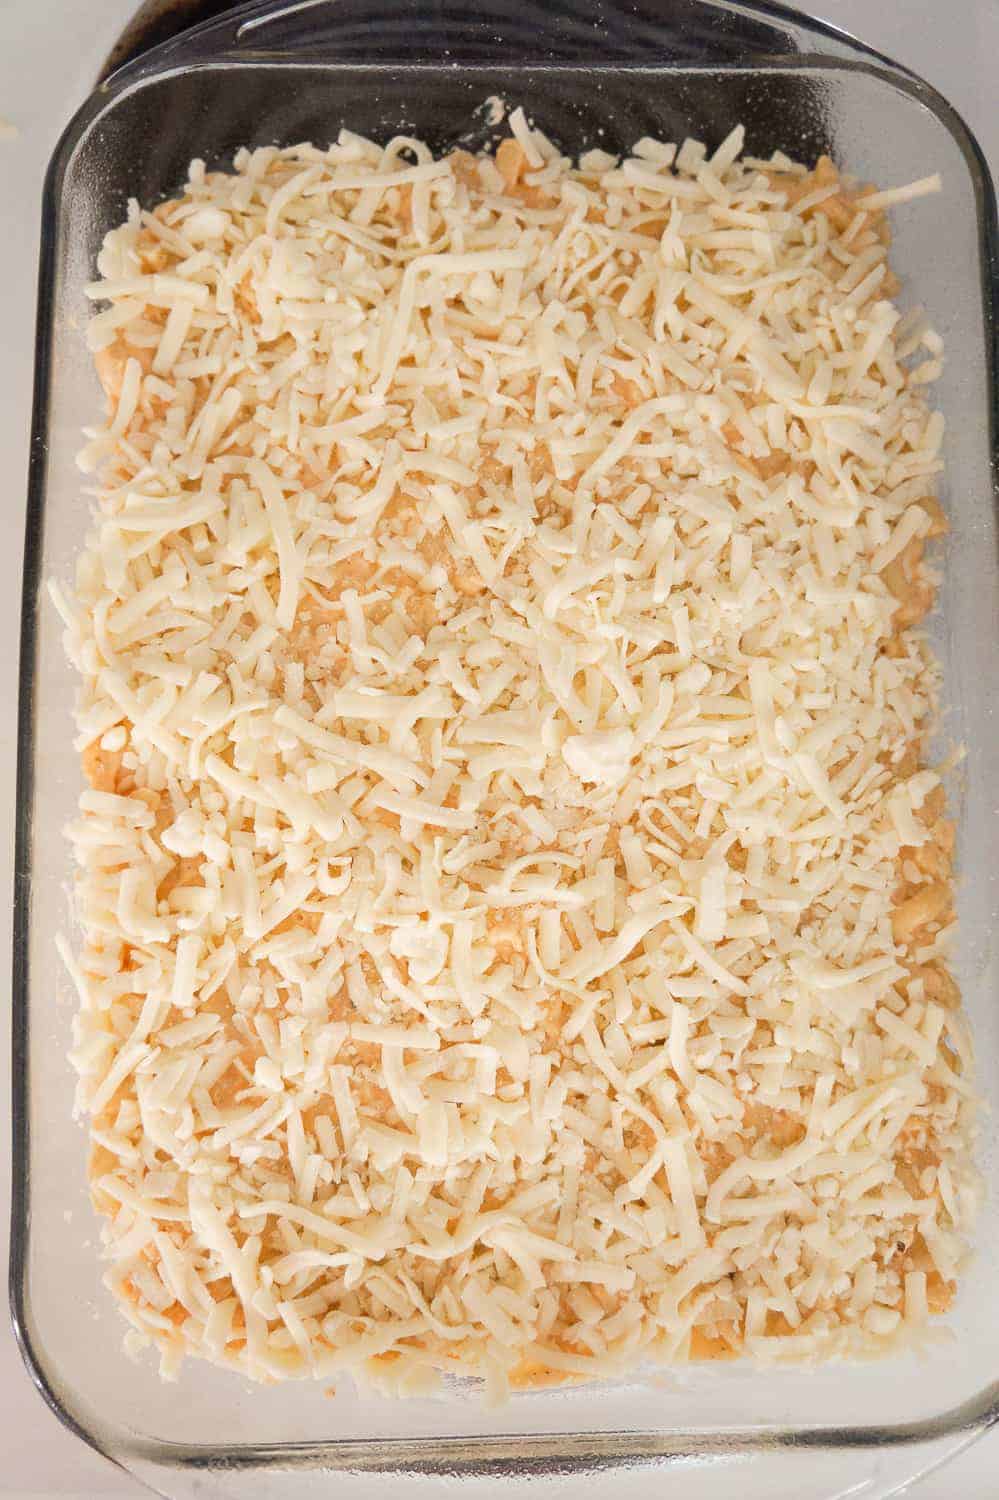 shredded mozzarella cheese on top of macaroni and cheese in a baking dish